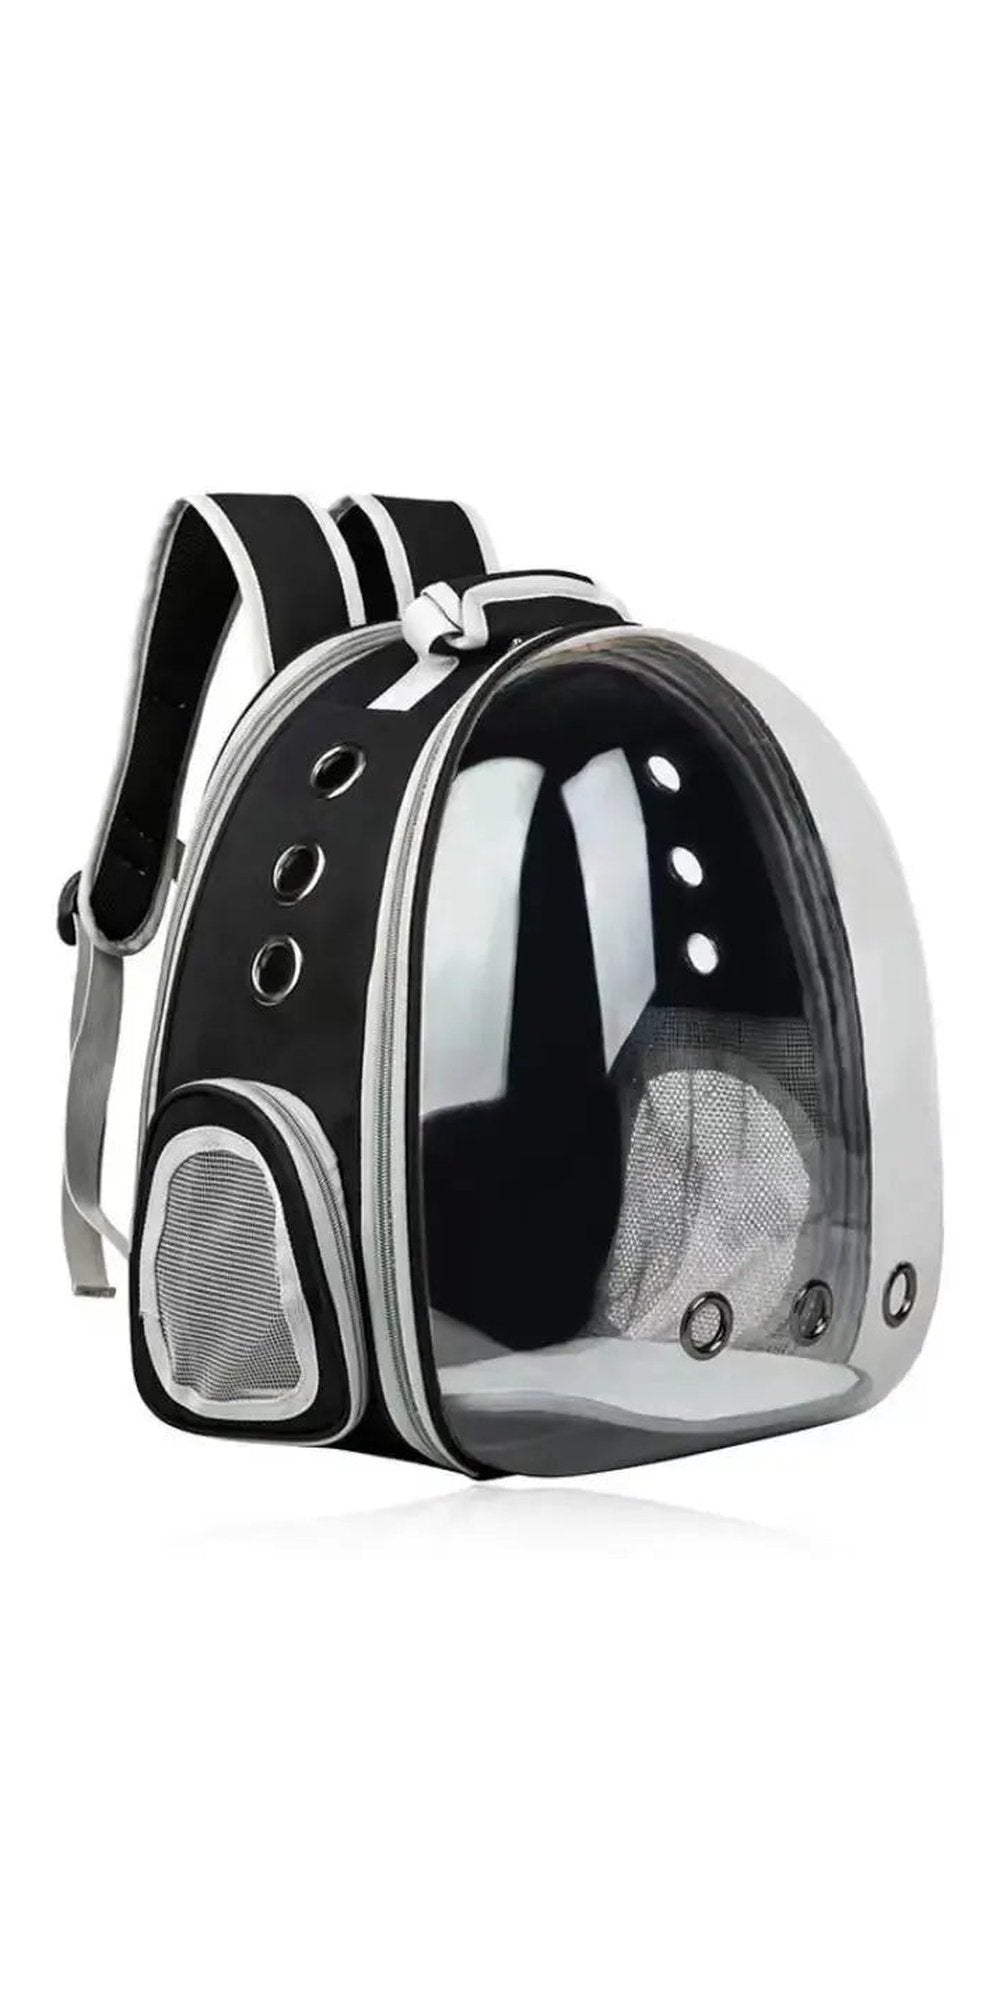 Expandable Cat Carrier Backpack Large Transparent Pet Carrier Travel Backpack Bubble Space Capsule High Quality Pet Travel Bag